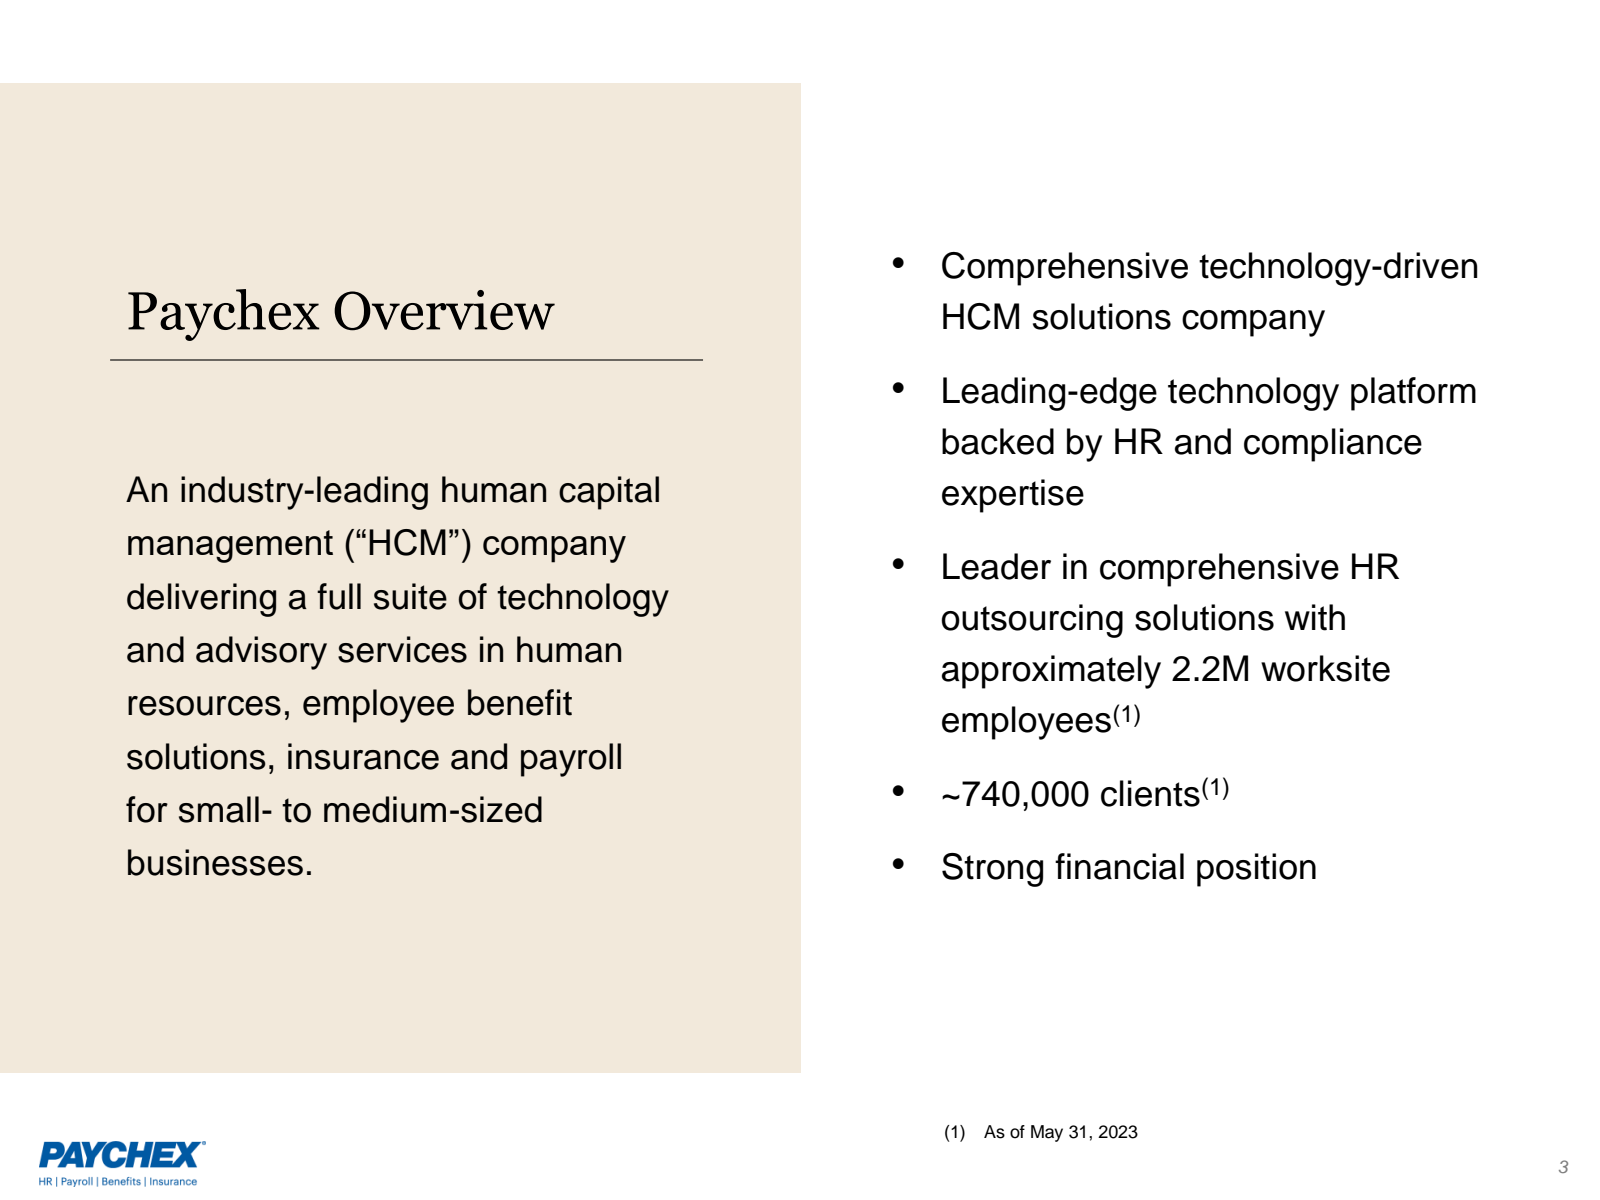 Paychex Overview 

A